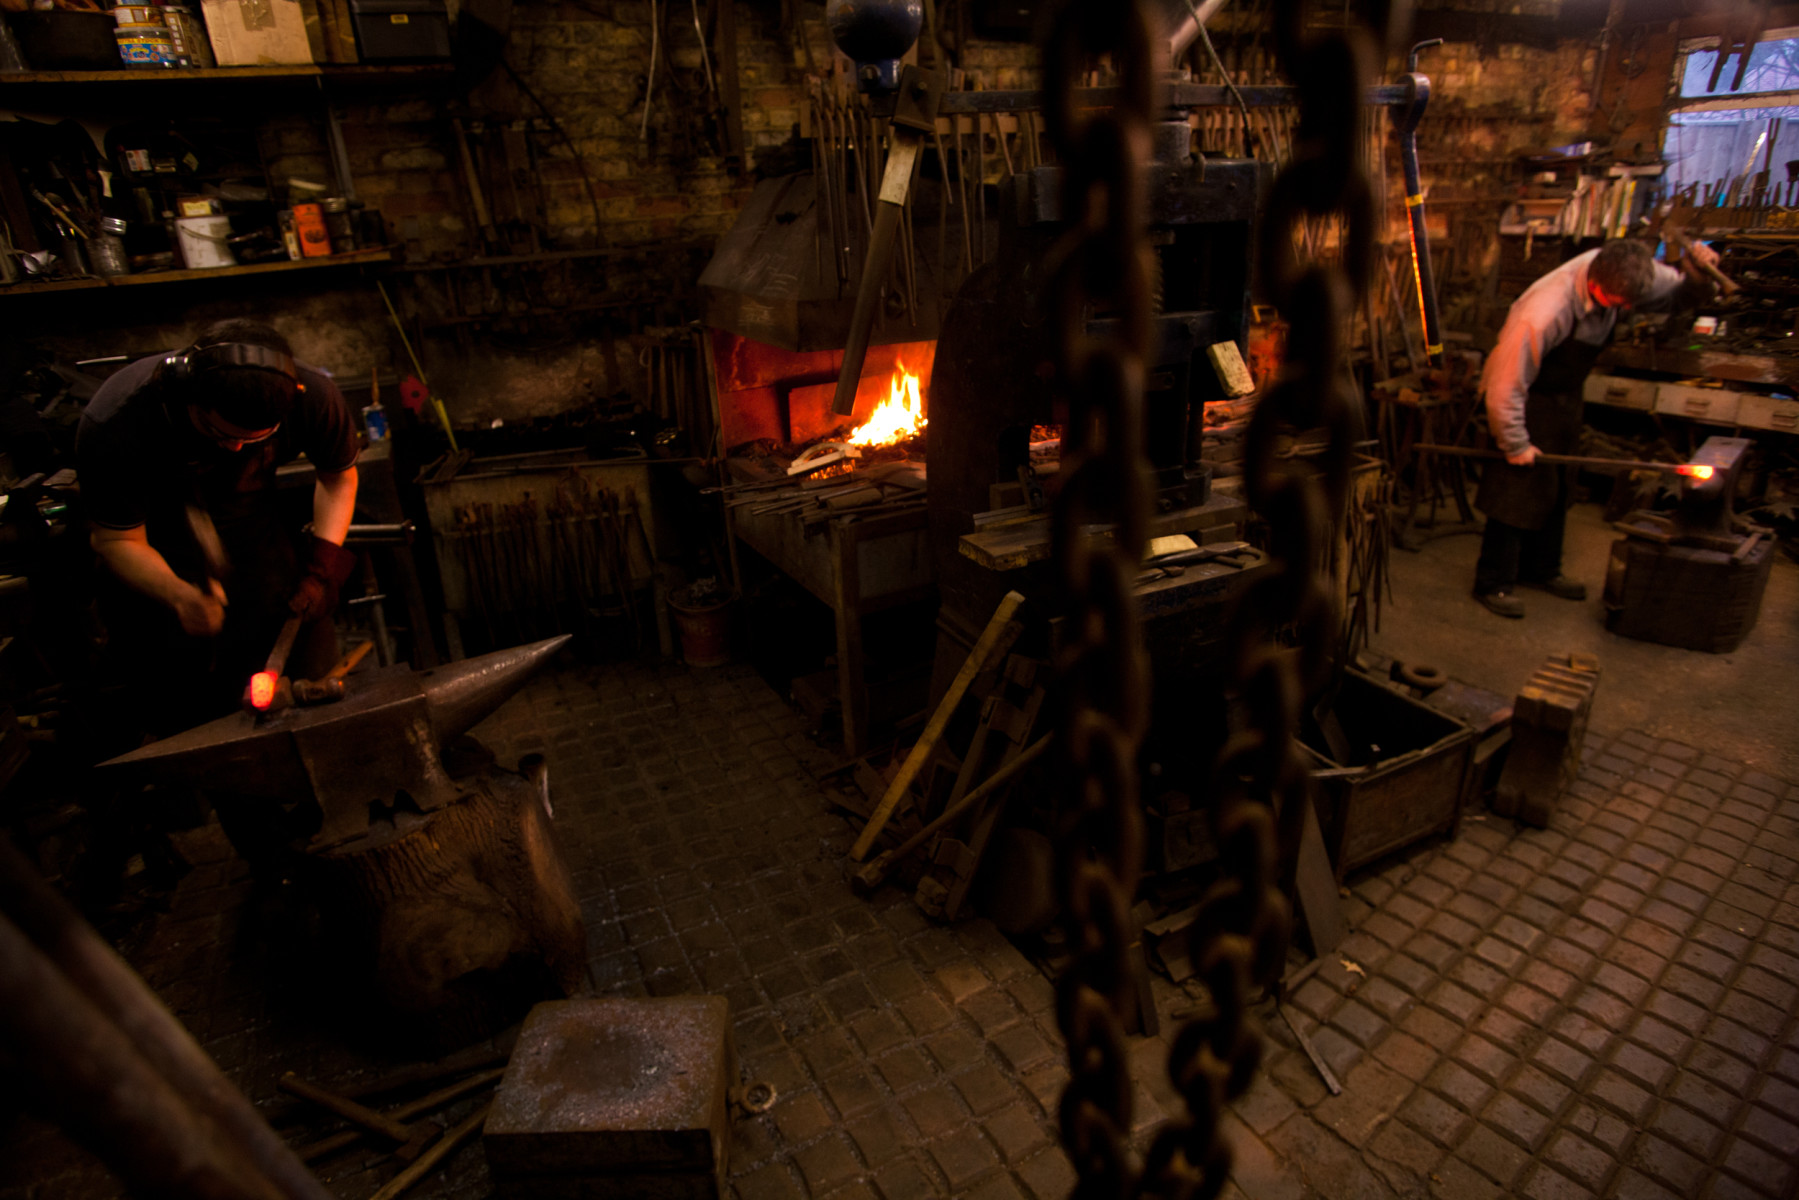 The working forge